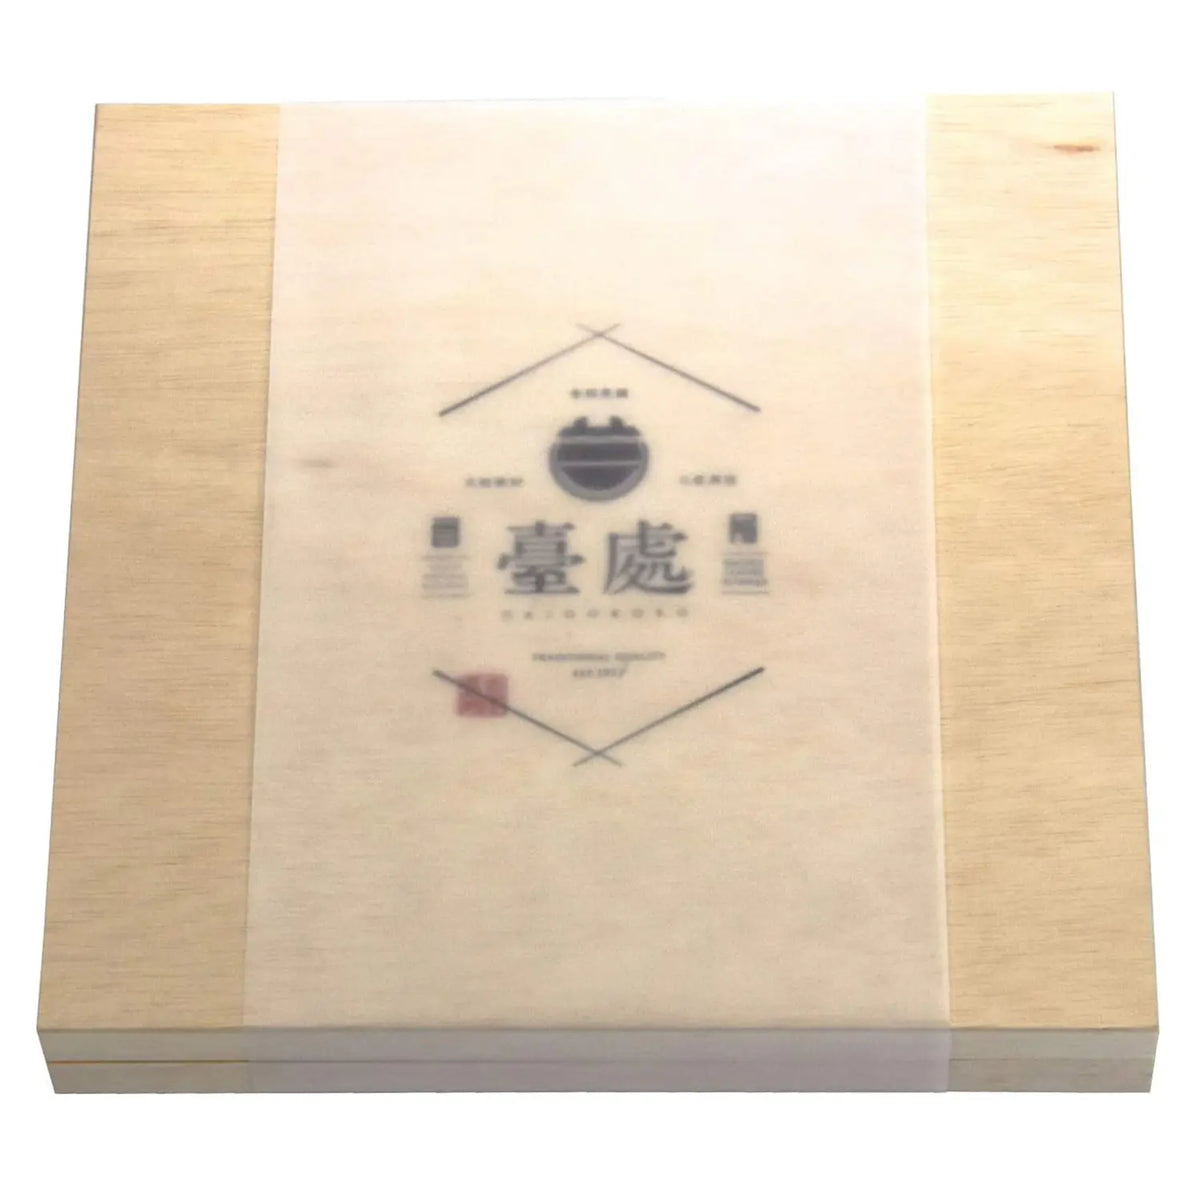 Yamacoh Kiso Hinoki Cypress Wooden Cutting Board with a Wooden Box